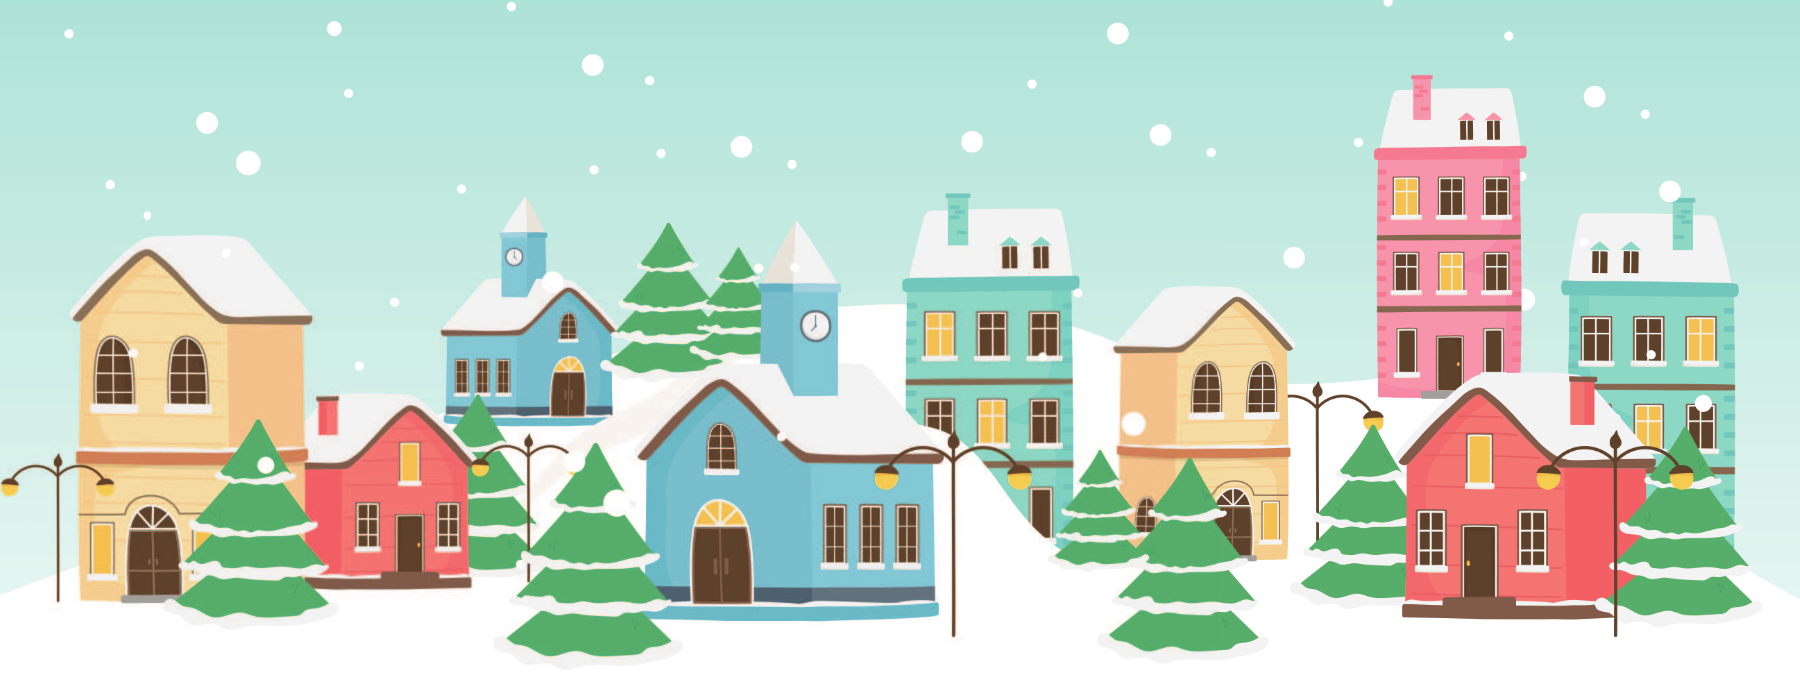 A snowy winter village scene with brightly coloured buildings and pine trees.